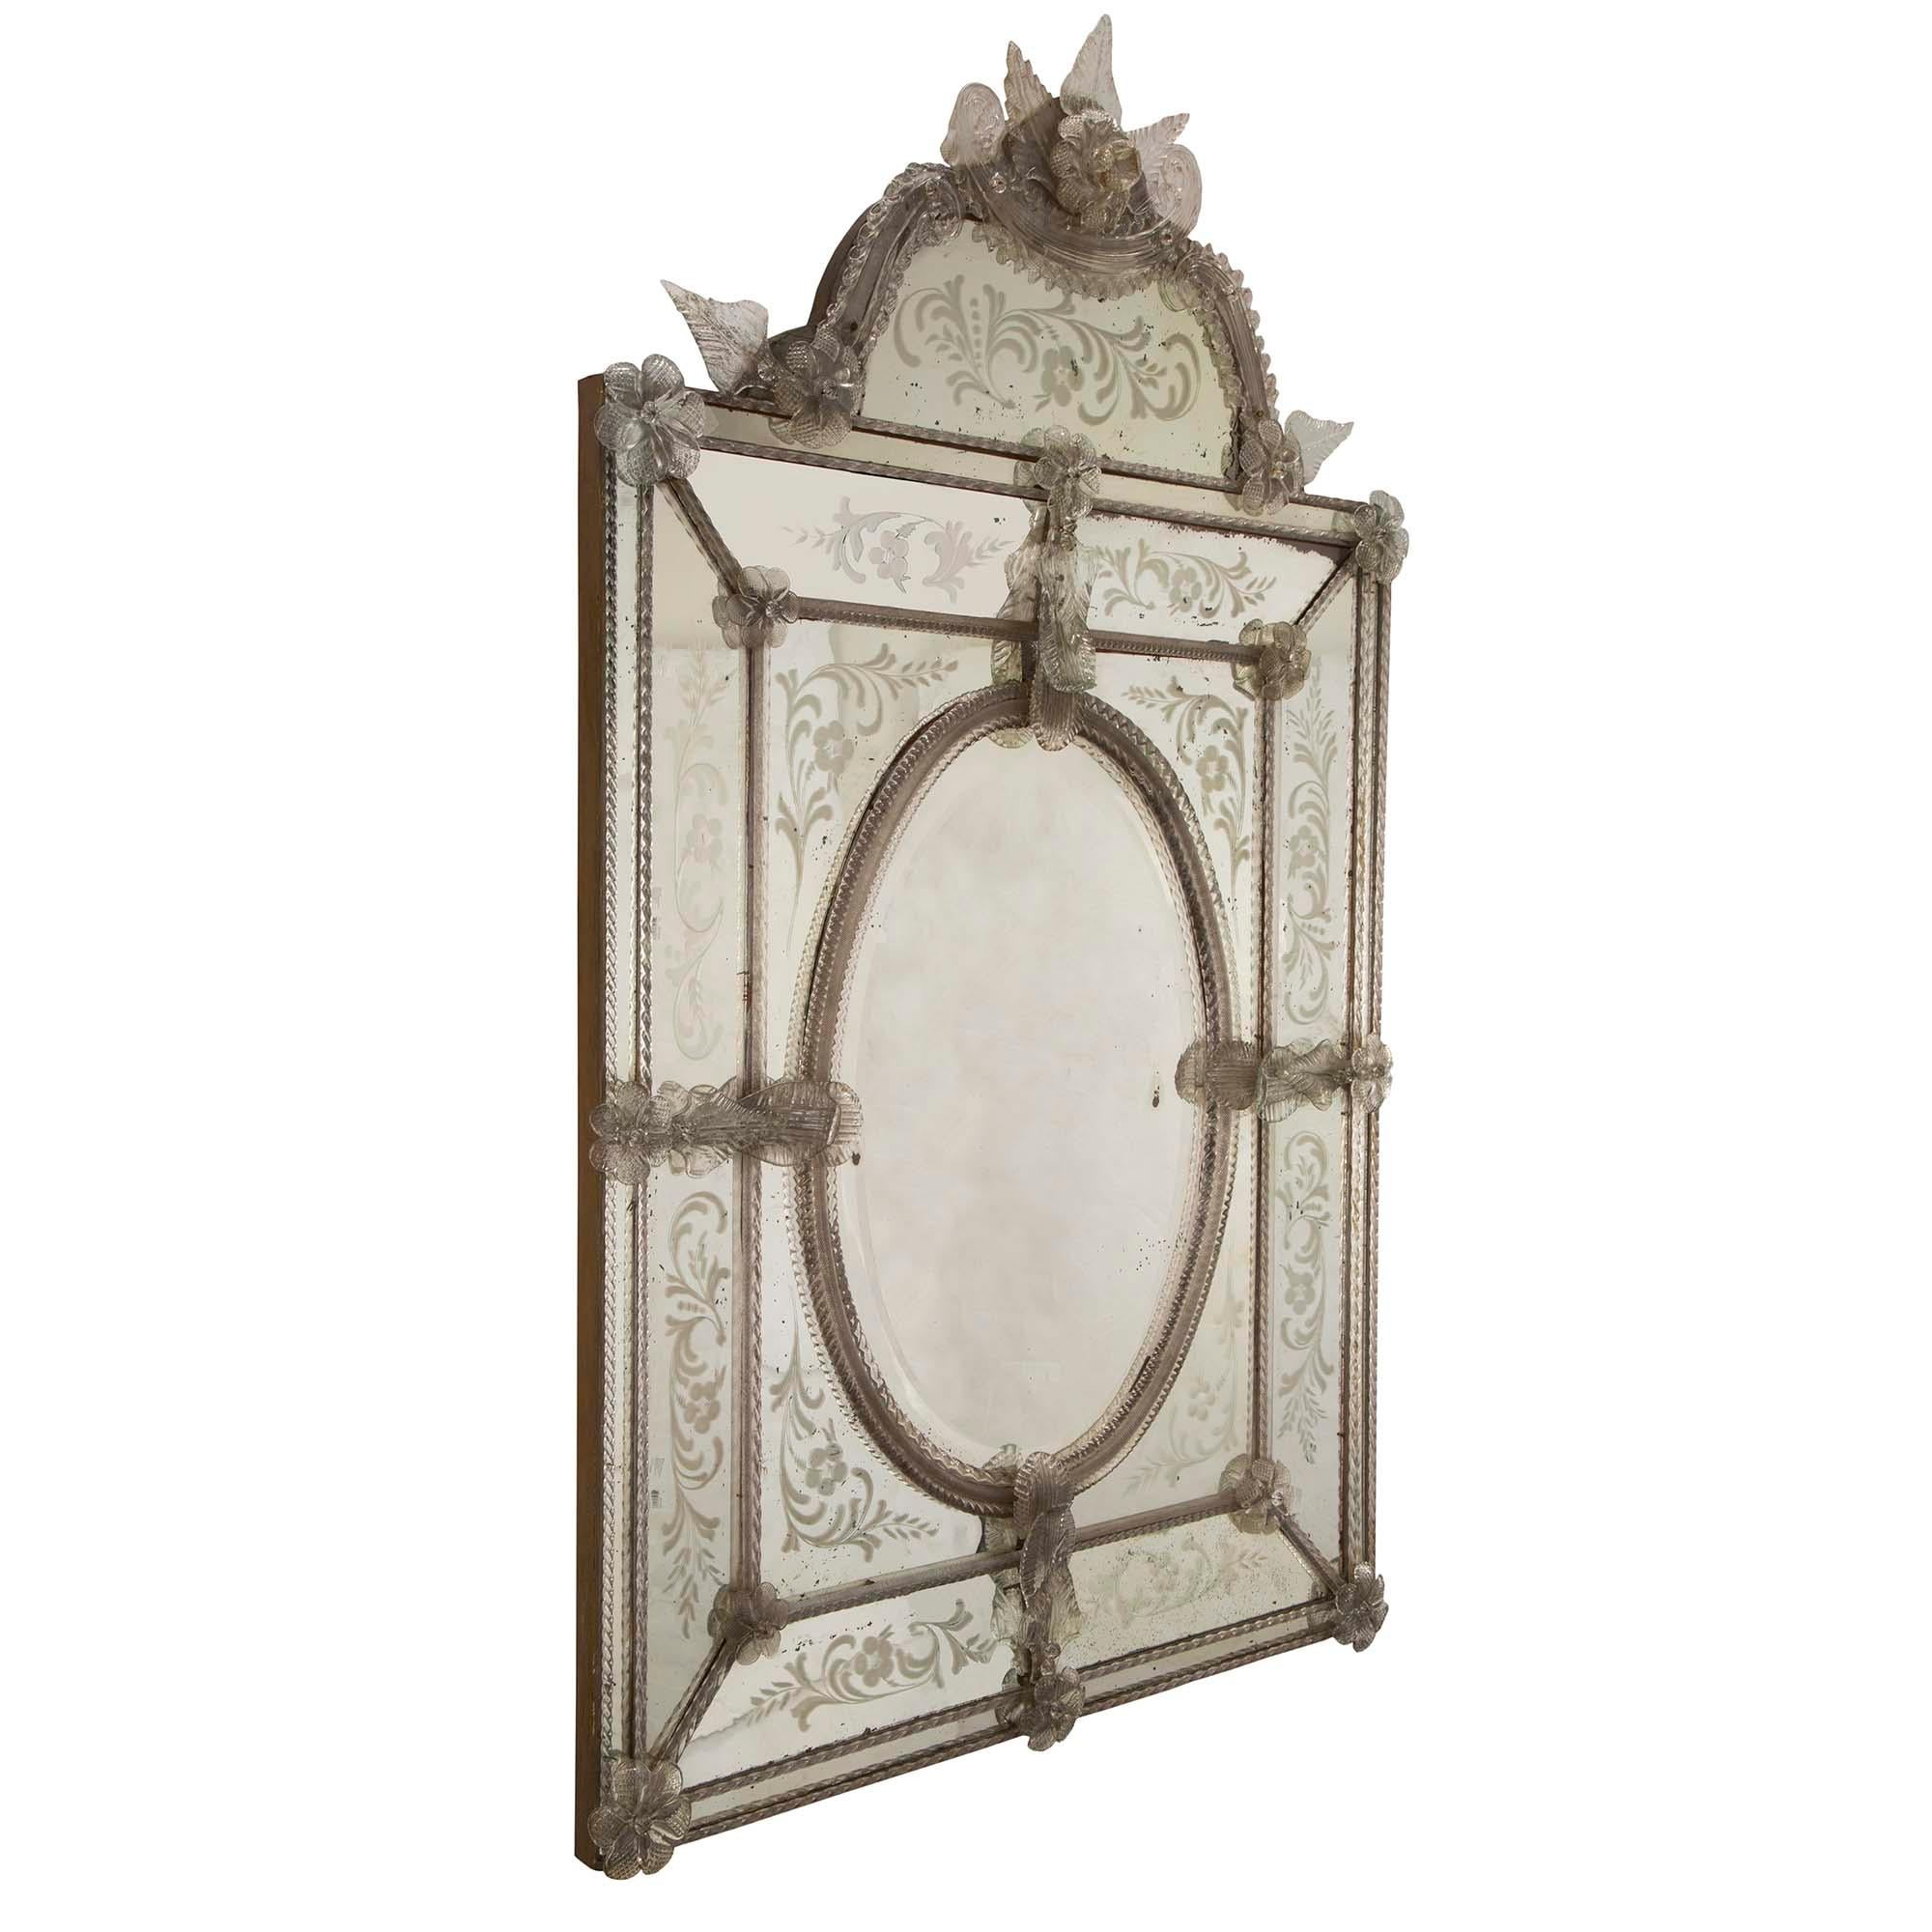 A stunning and high quality Italian 19th century Venetian and Murano glass triple framed mirror. The original central beveled mirror plate is framed within fabulous twisted Murano glass fillets with rich hand blown glass reserves. The outer original